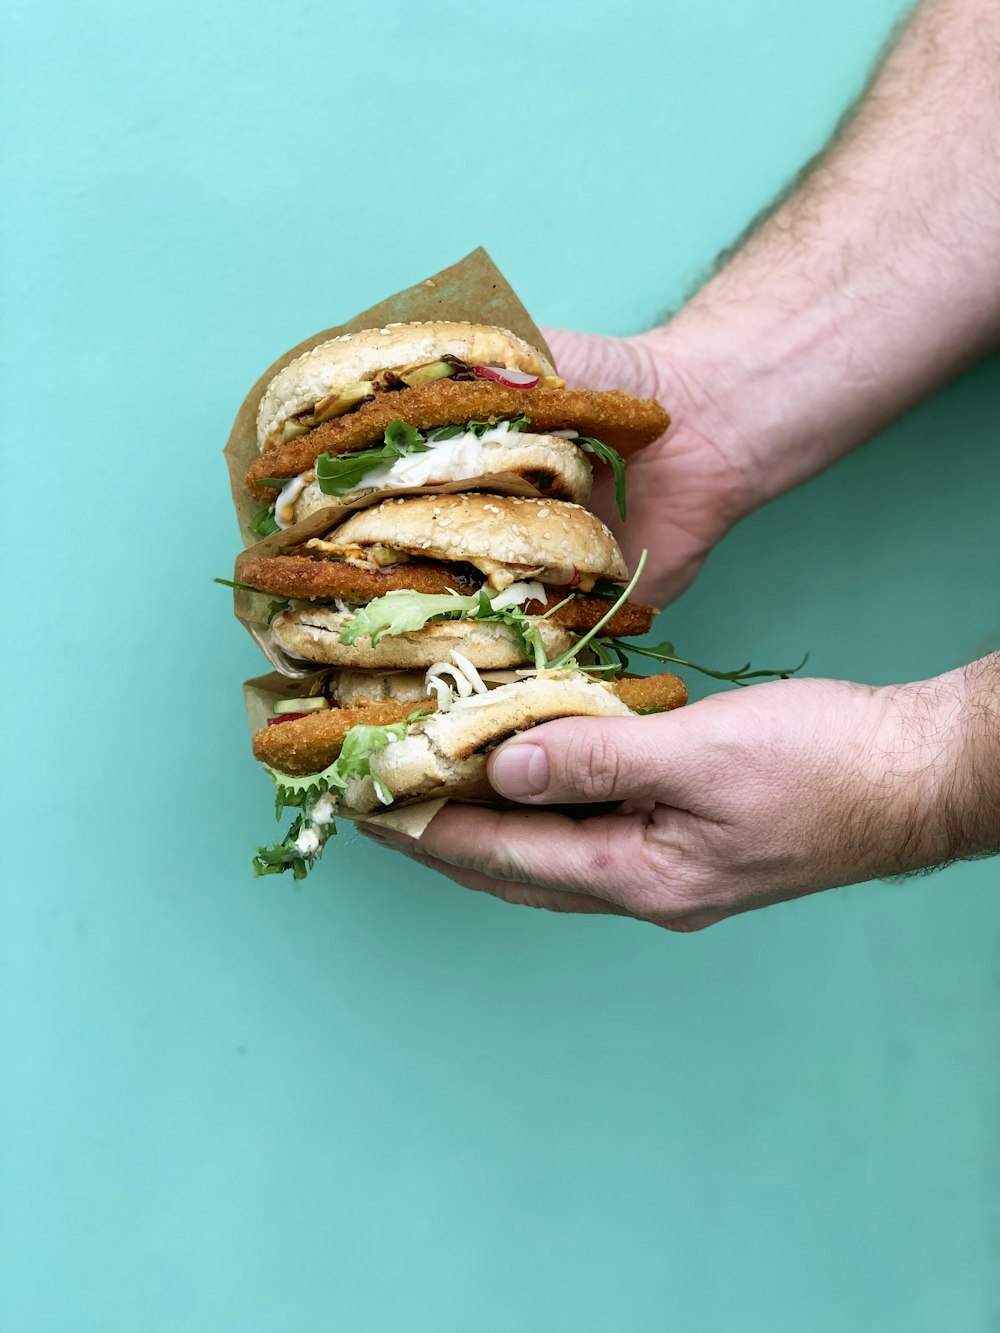 person holding burger with lettuce and tomato